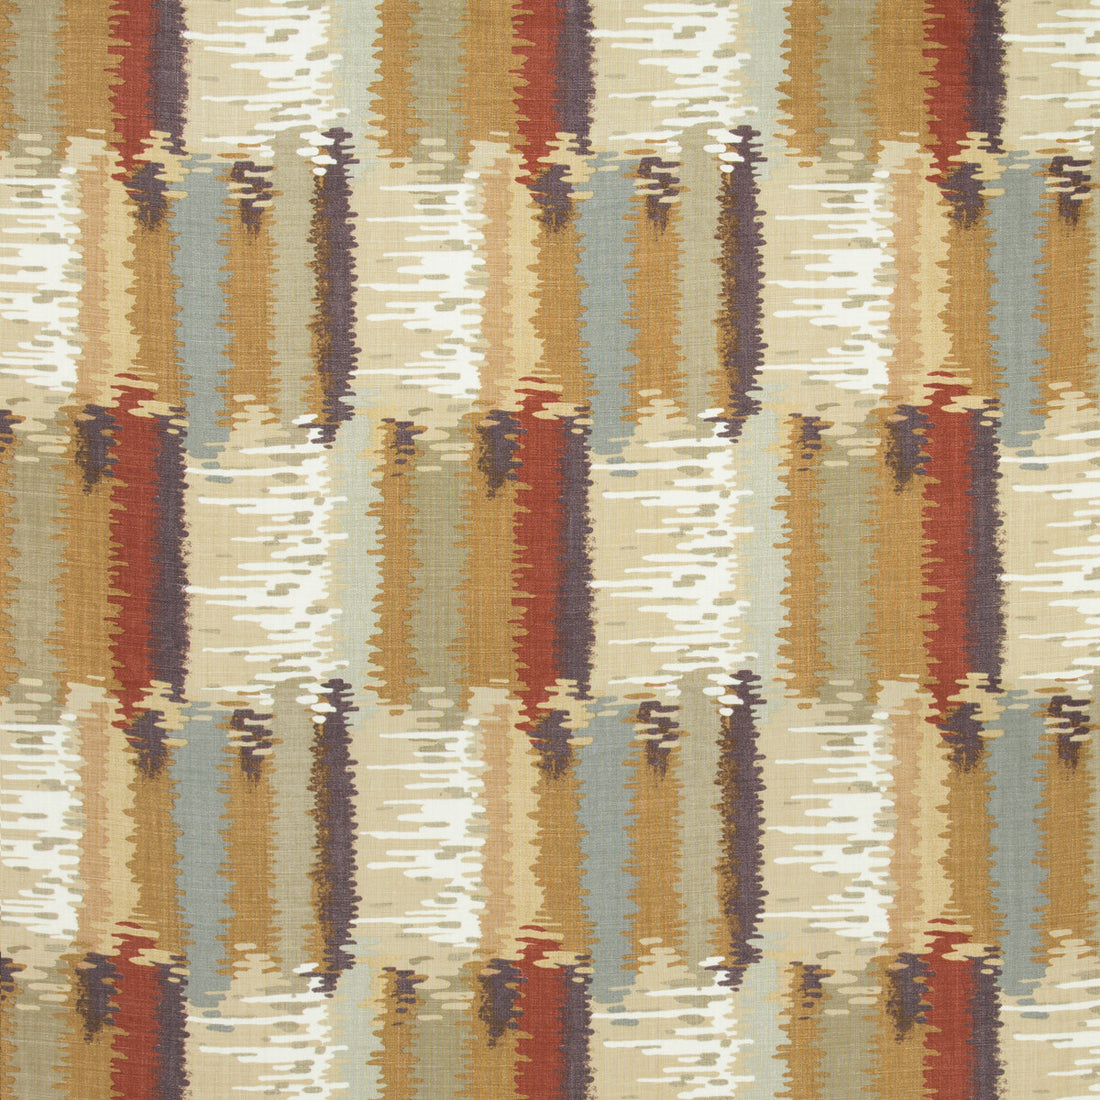 La Muse fabric in spice color - pattern LA MUSE.1419.0 - by Kravet Couture in the Modern Tailor collection